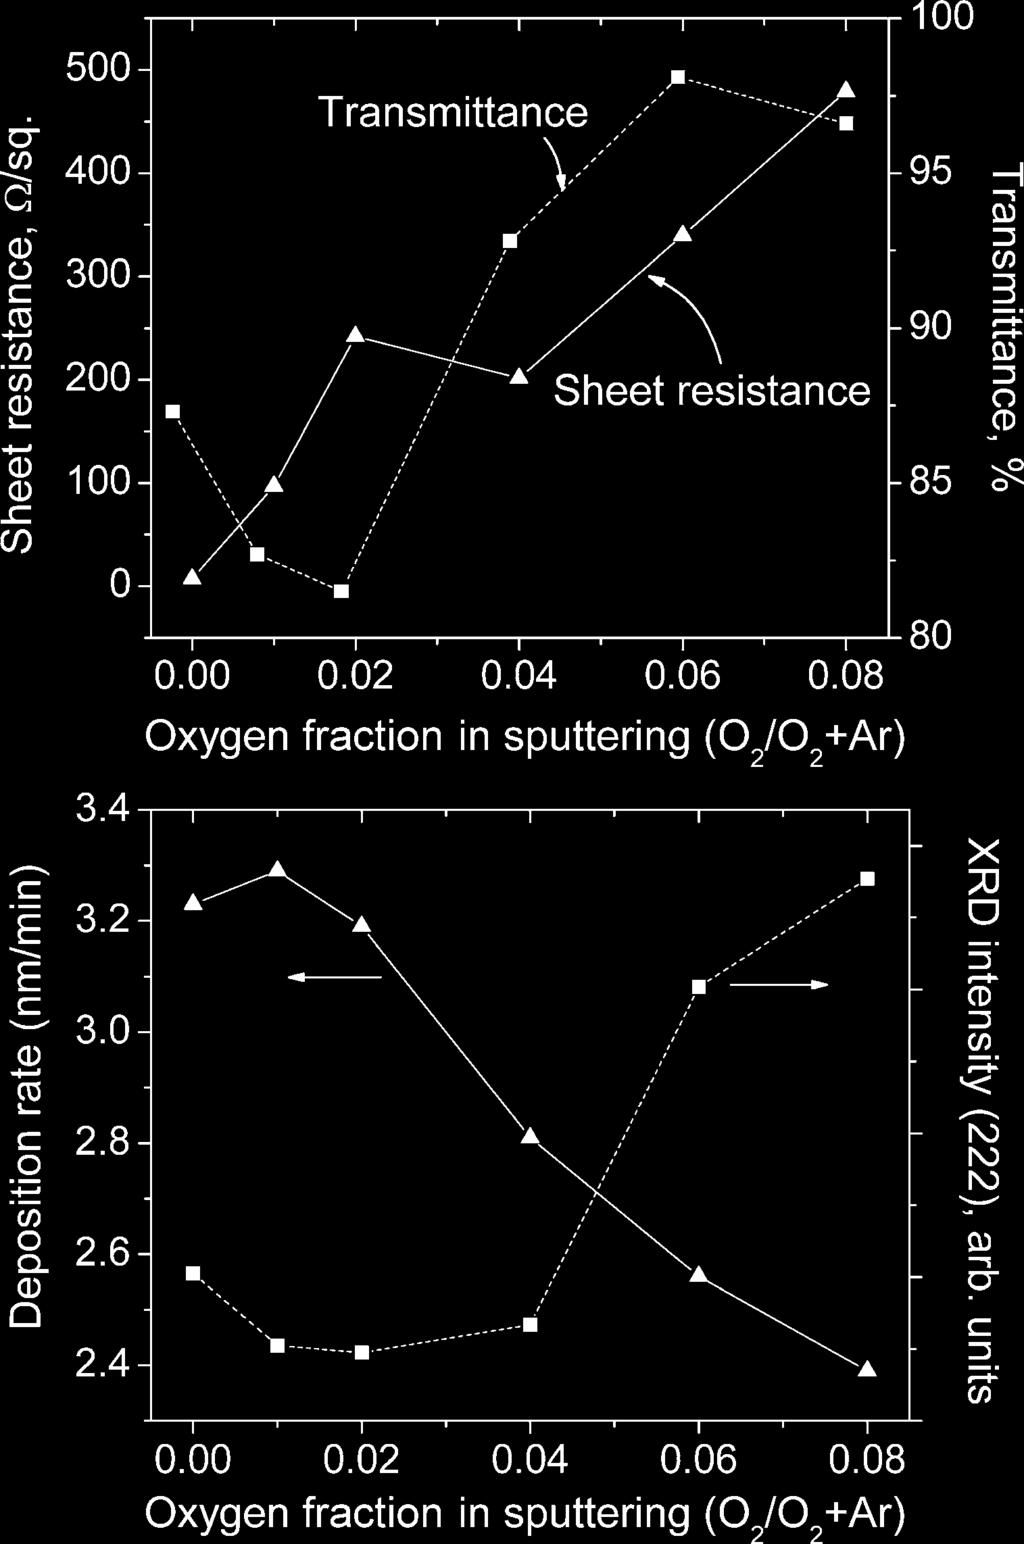 S.-I. Jun et al. / Thin Solid Films 476 (2005) 59 64 63 the other hand, as the fraction of oxygen is increased, the concentration of oxygen vacancies is decreased.